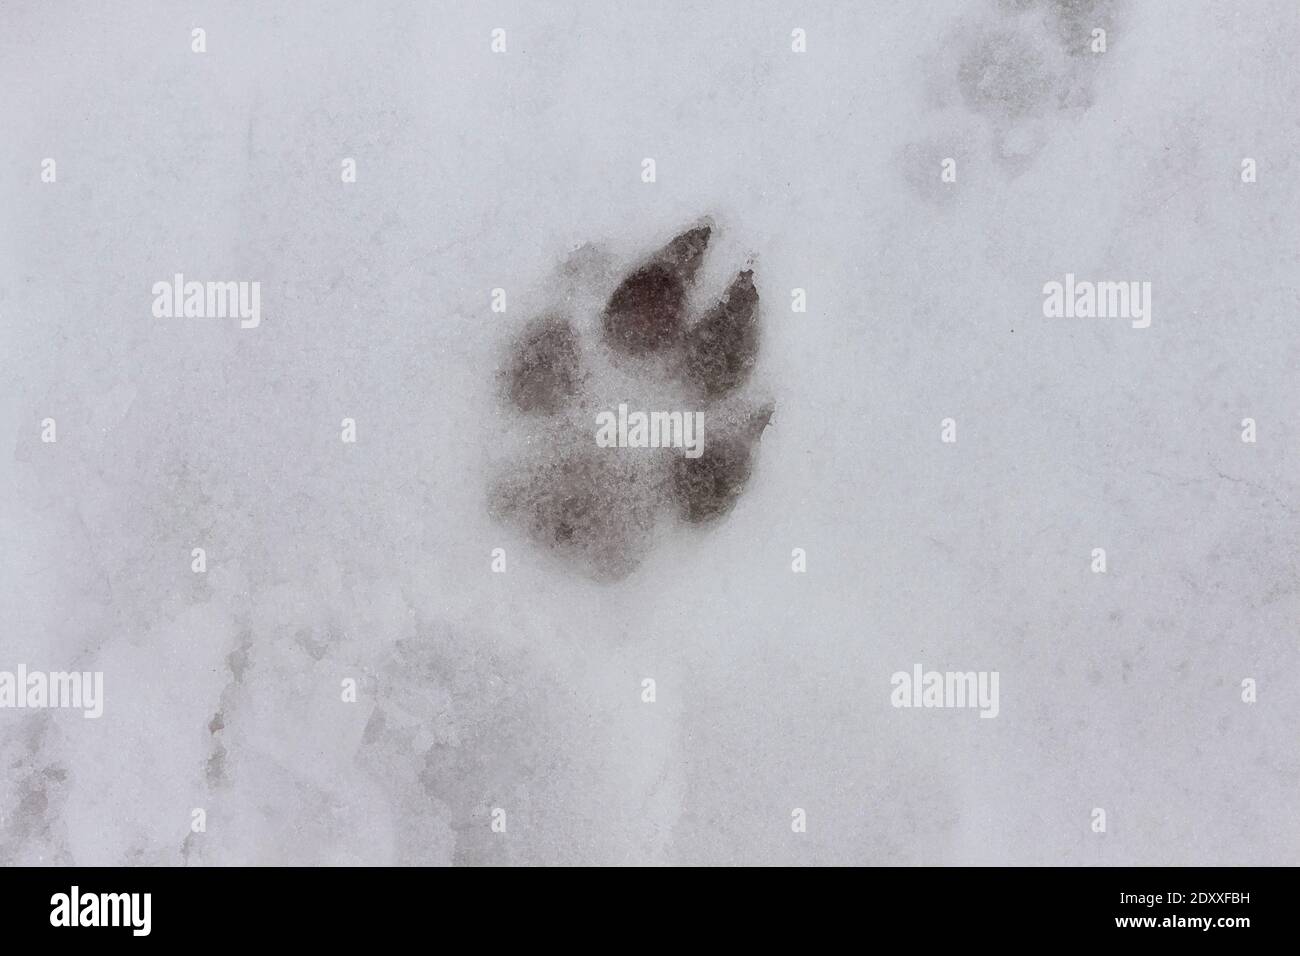 a single dog paw print in the snow during winter, portrait Stock Photo